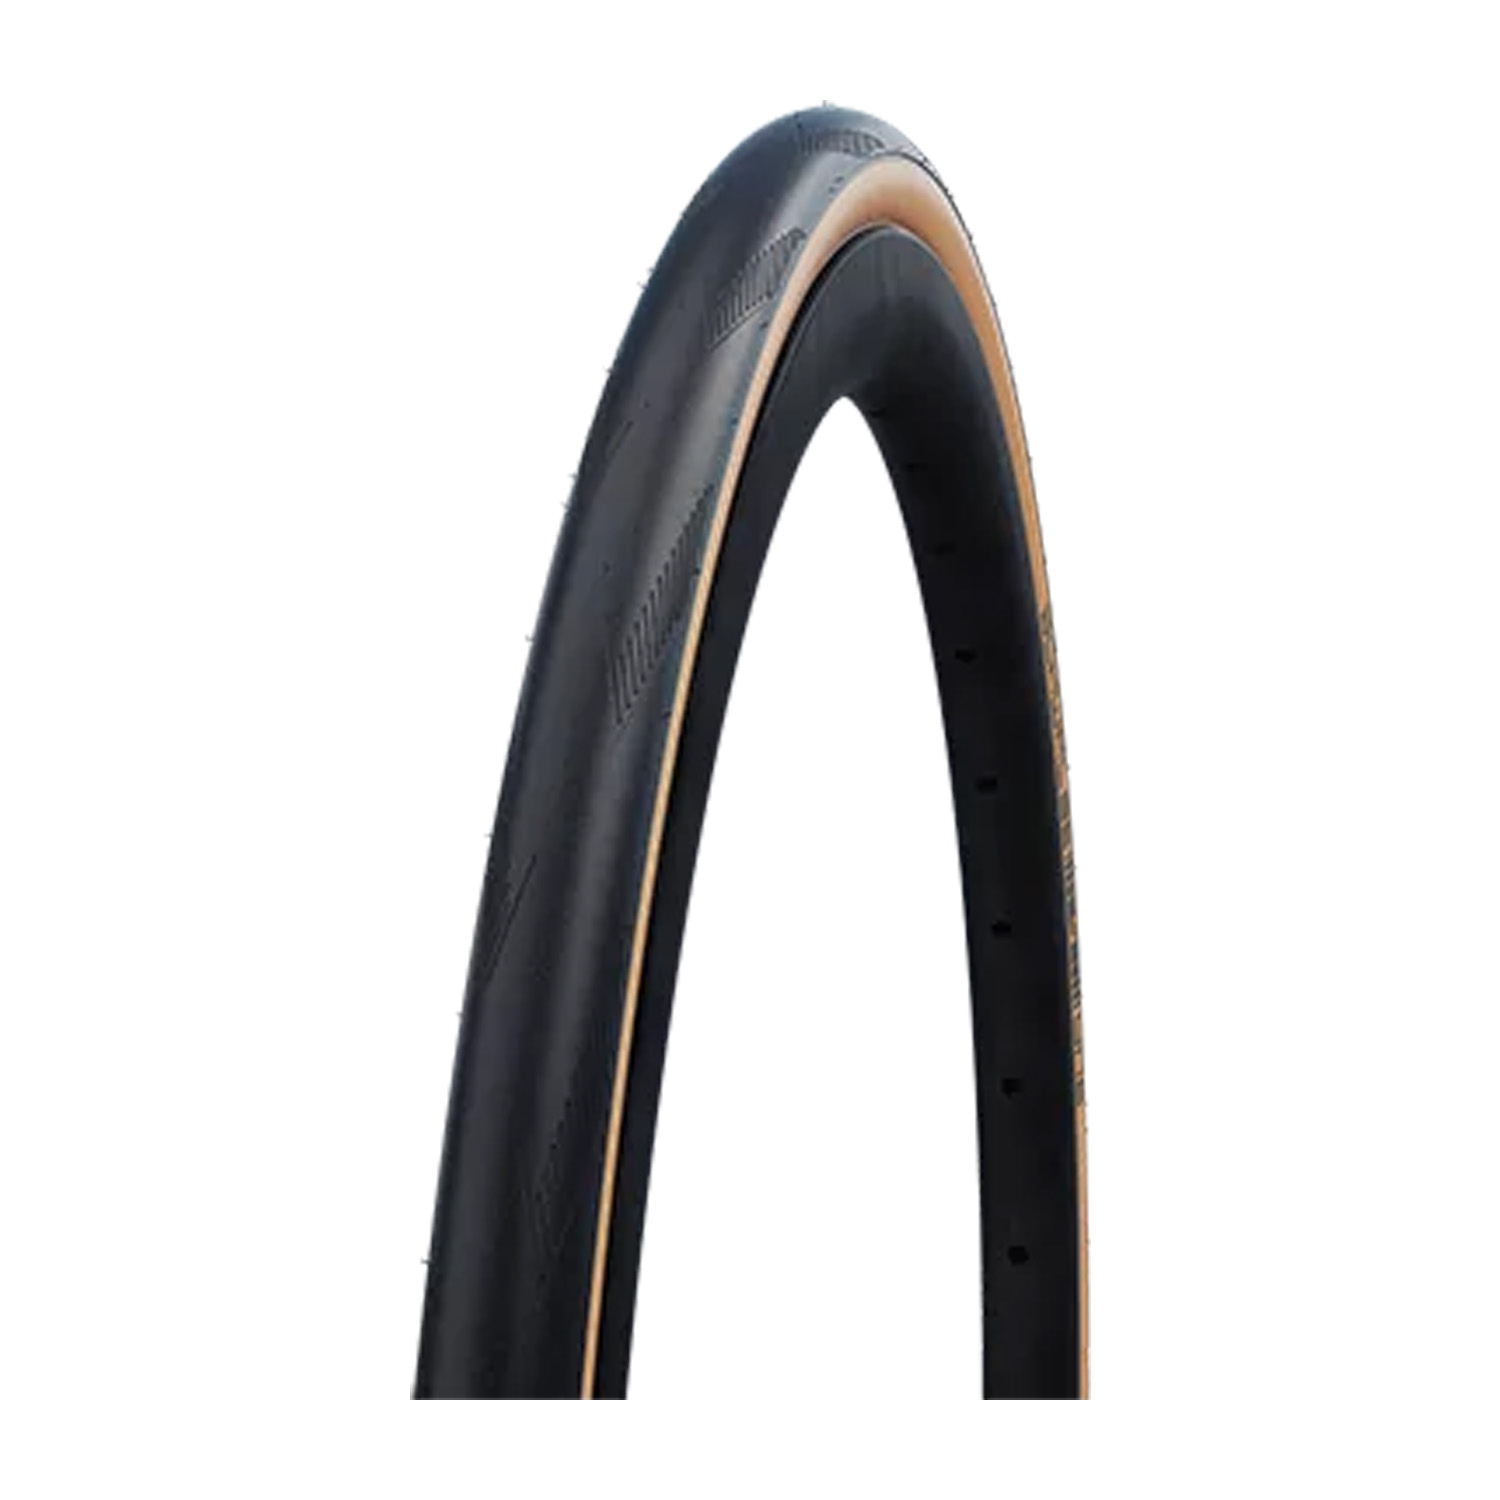 Schwalbe One tube type racefiets band